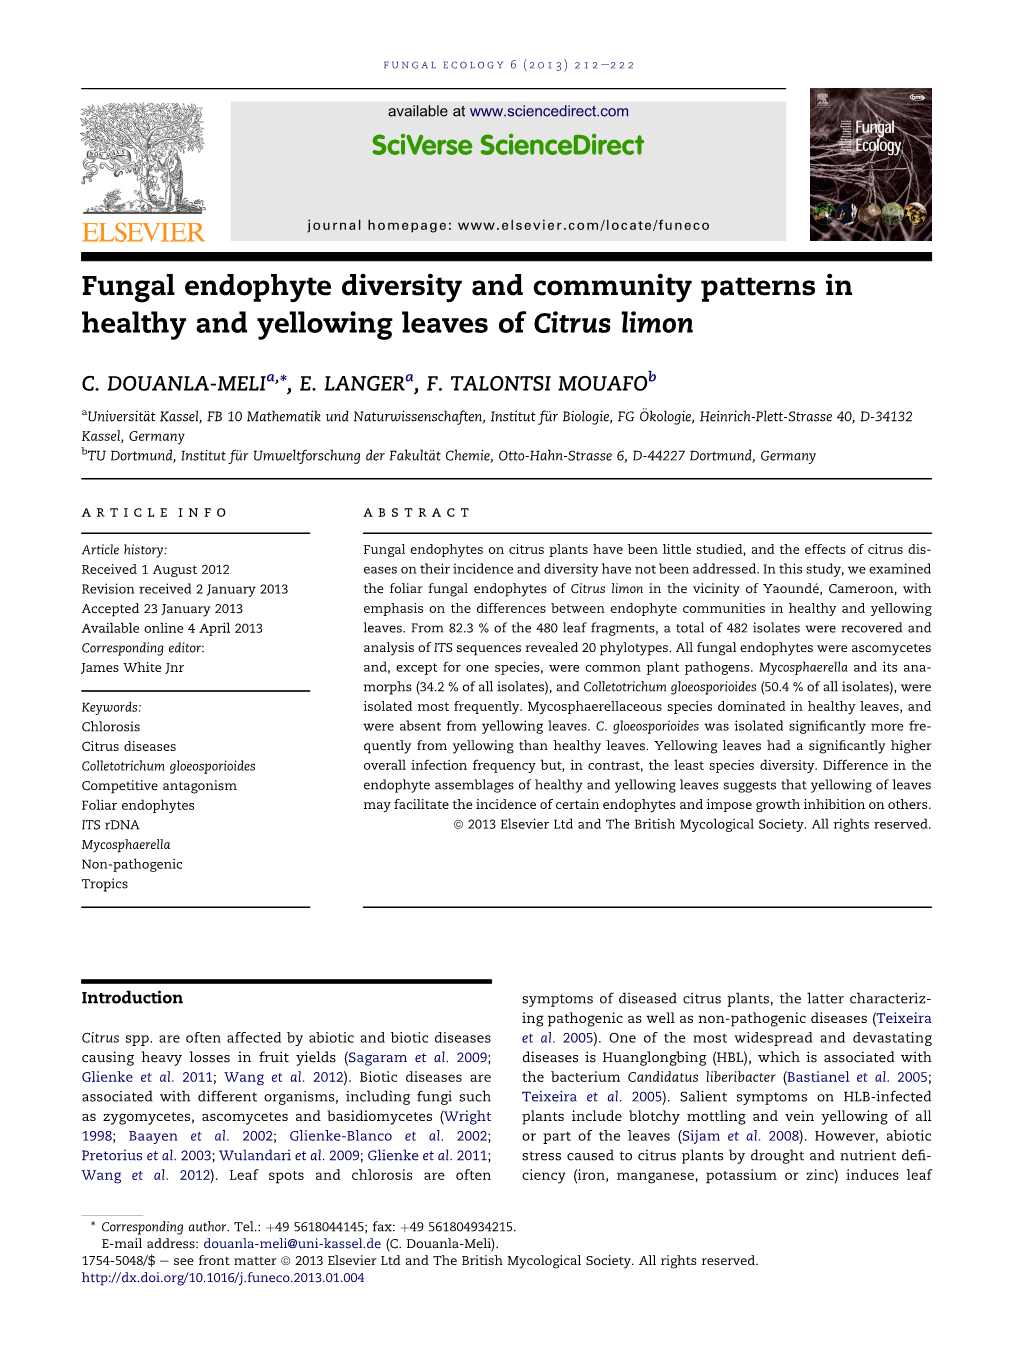 Fungal Endophyte Diversity and Community Patterns in Healthy and Yellowing Leaves of Citrus Limon